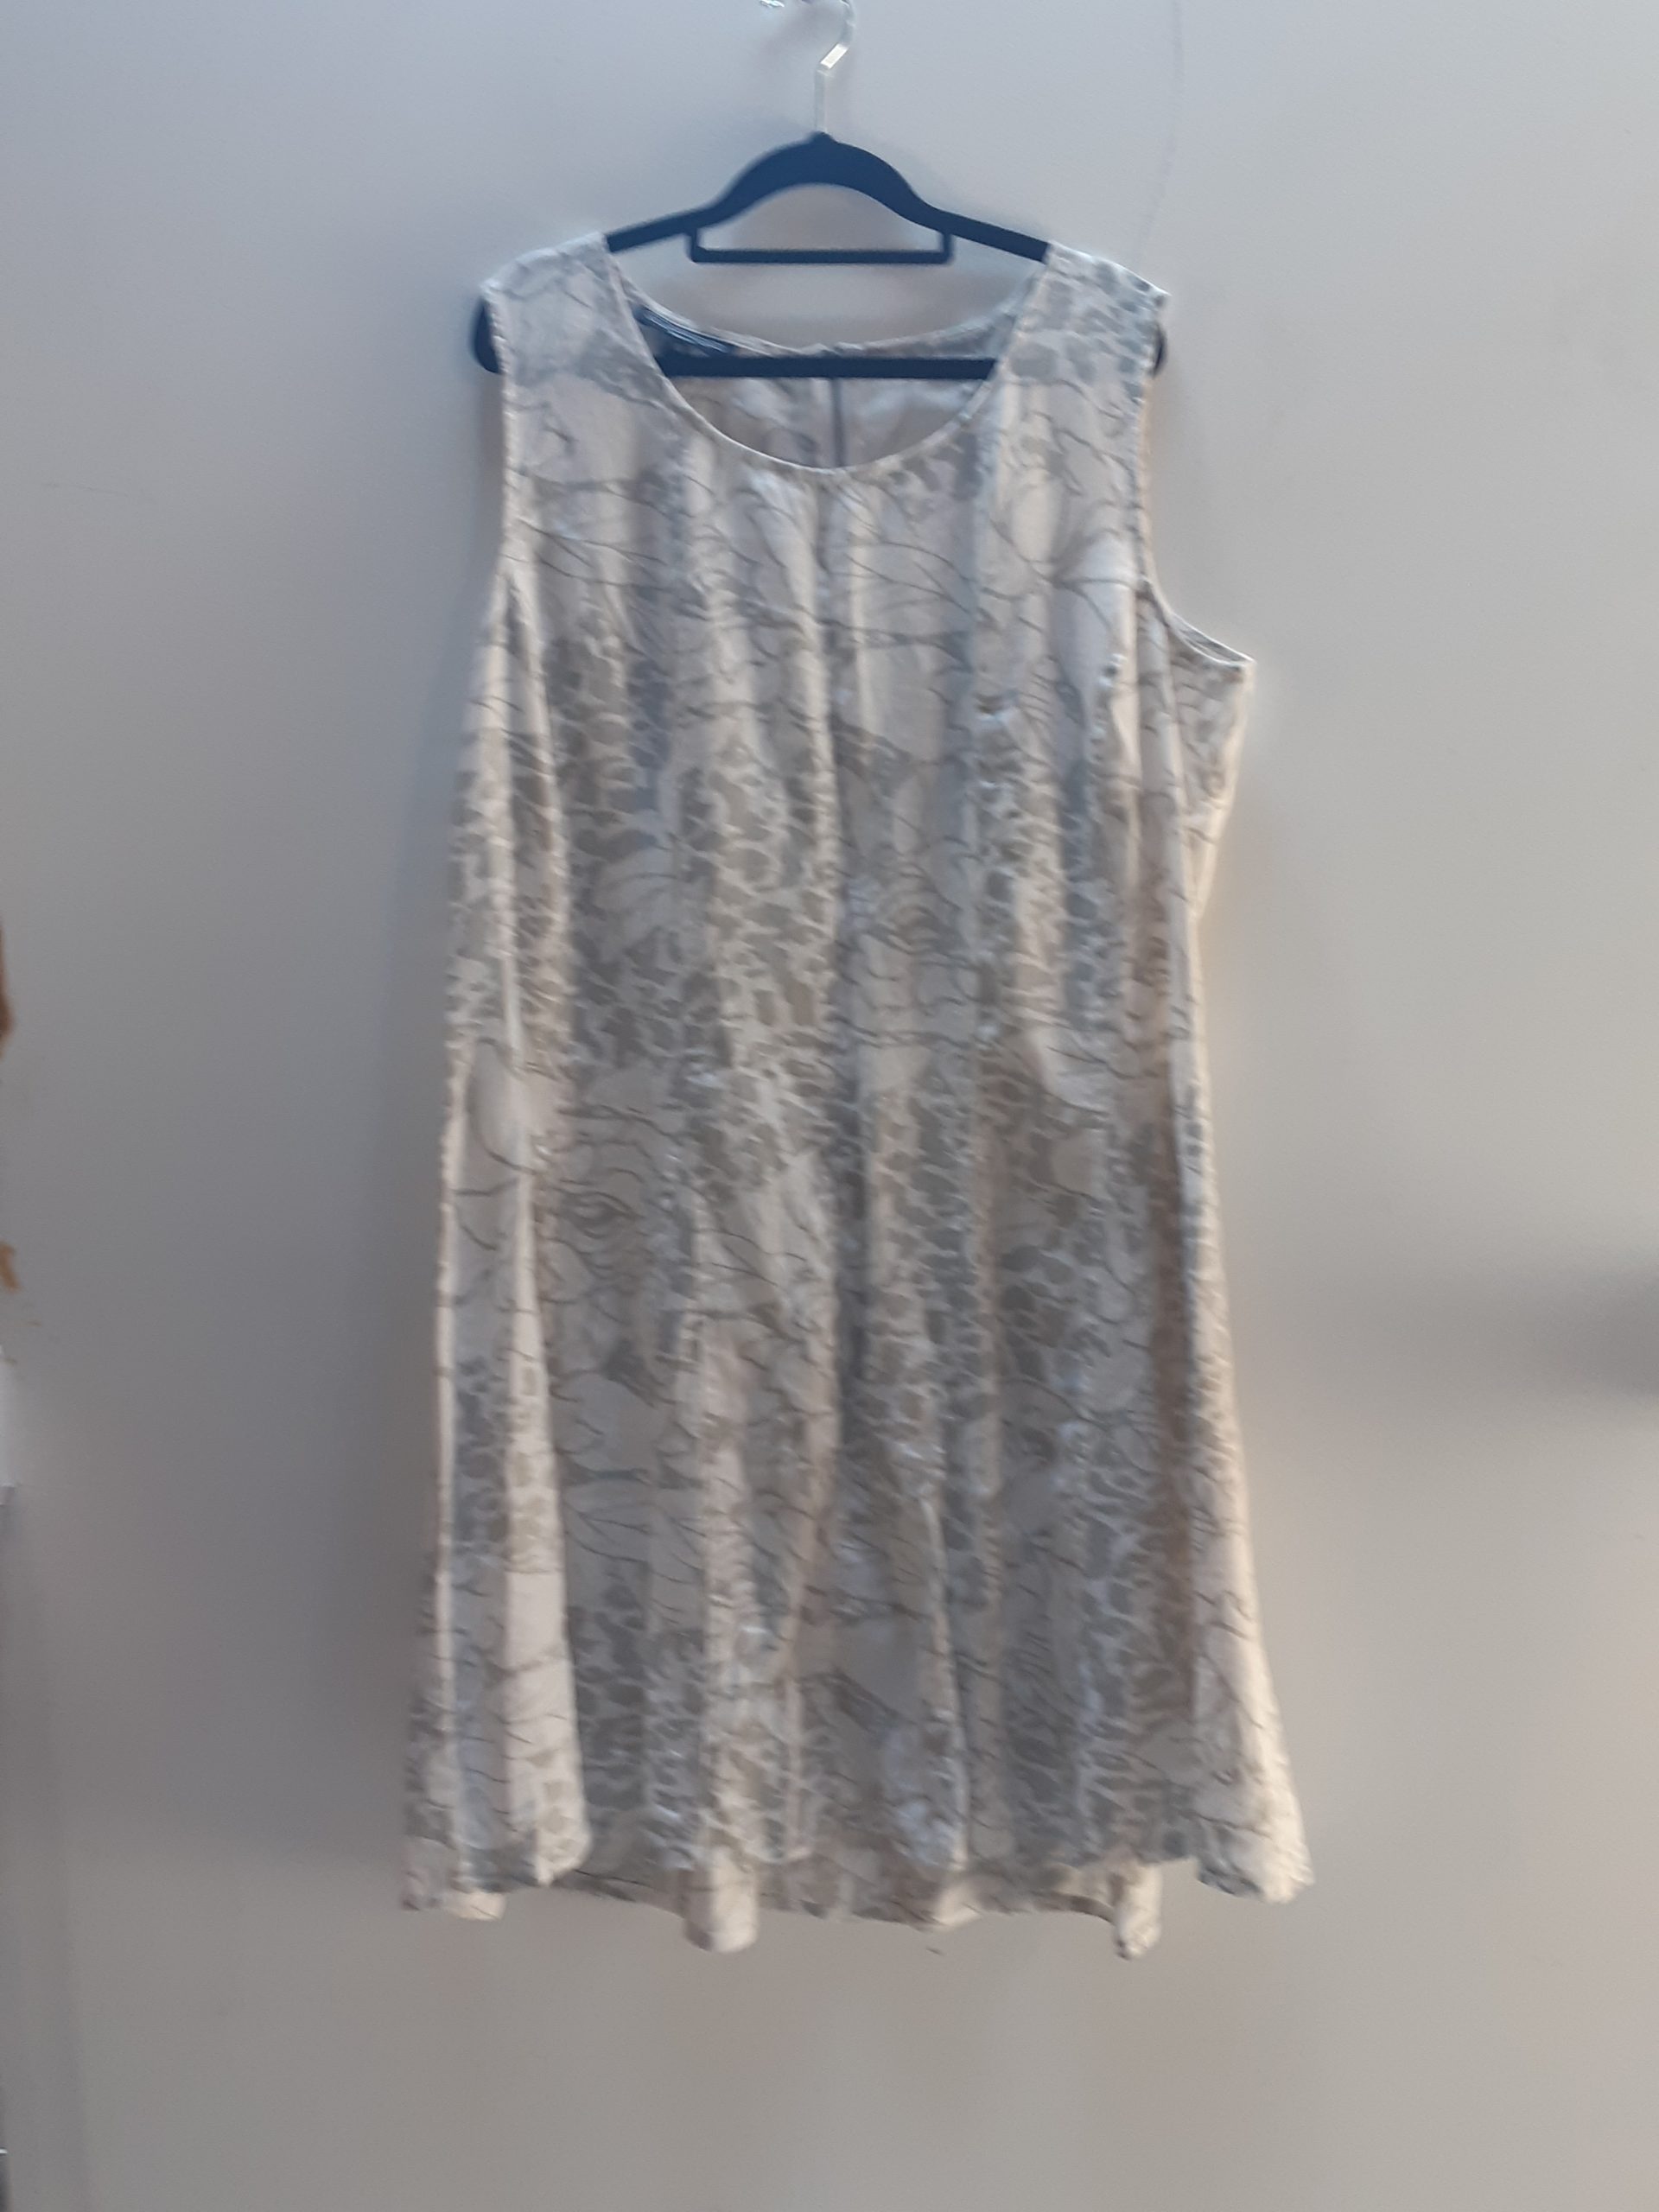 Grey and white linen dress - Swapology